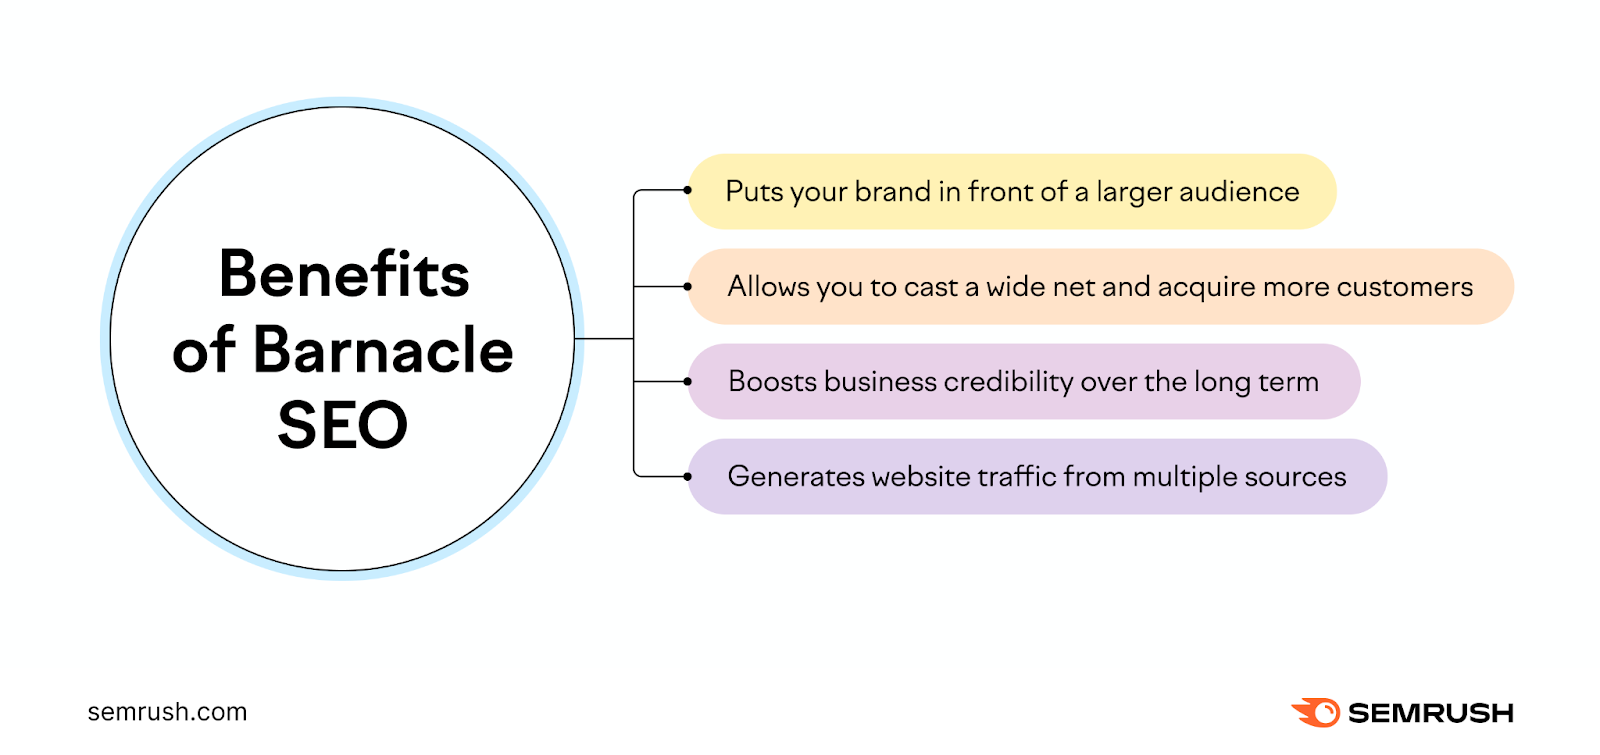 Benefits of Barnacle SEO: Puts your brand in front of a larger audience, allows you to cast a wide net and acquire more customers, boosts business credibility over the long term, generates website traffic from multiple sources